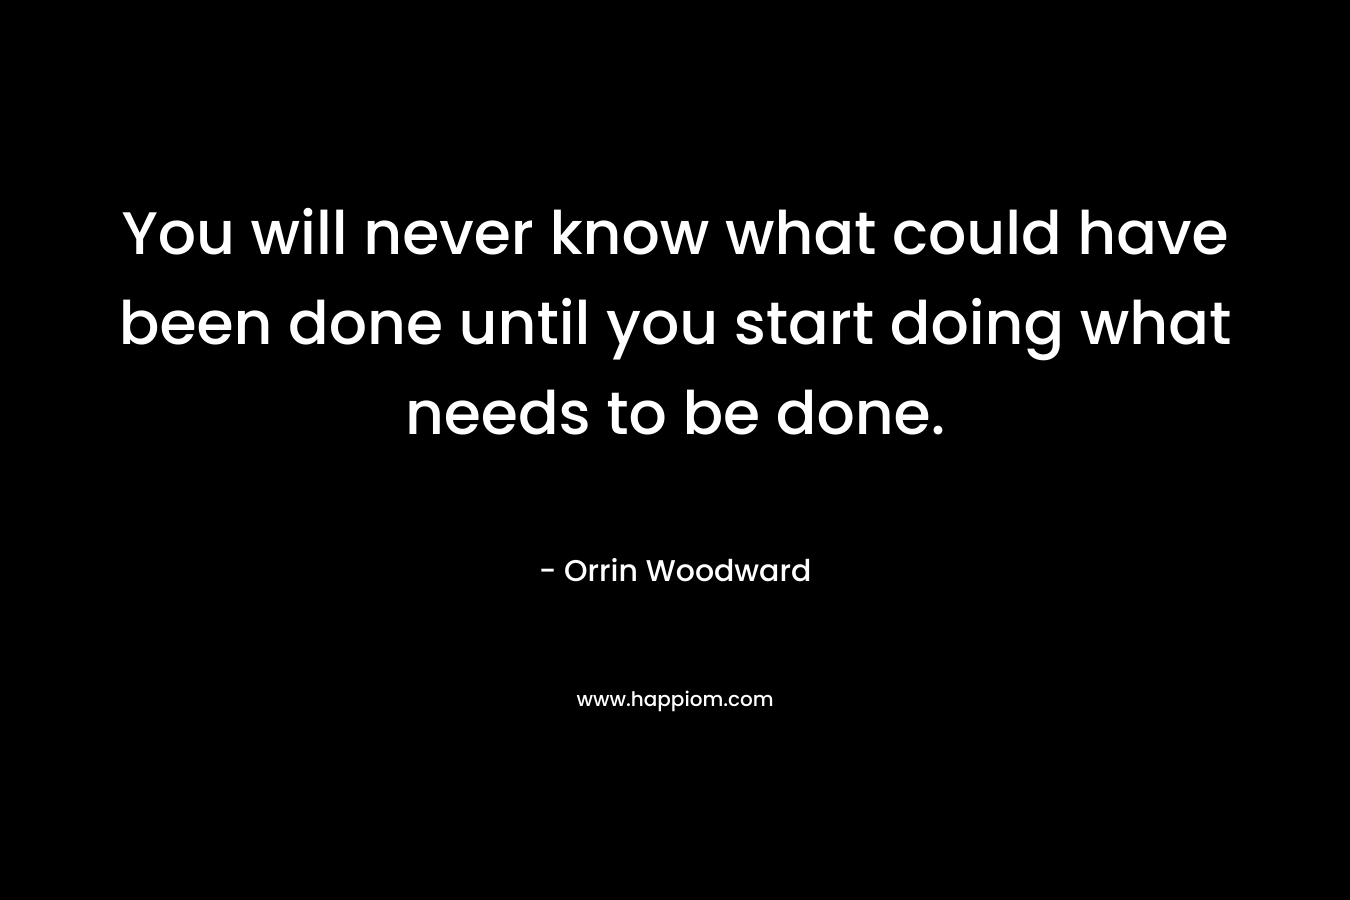 You will never know what could have been done until you start doing what needs to be done.